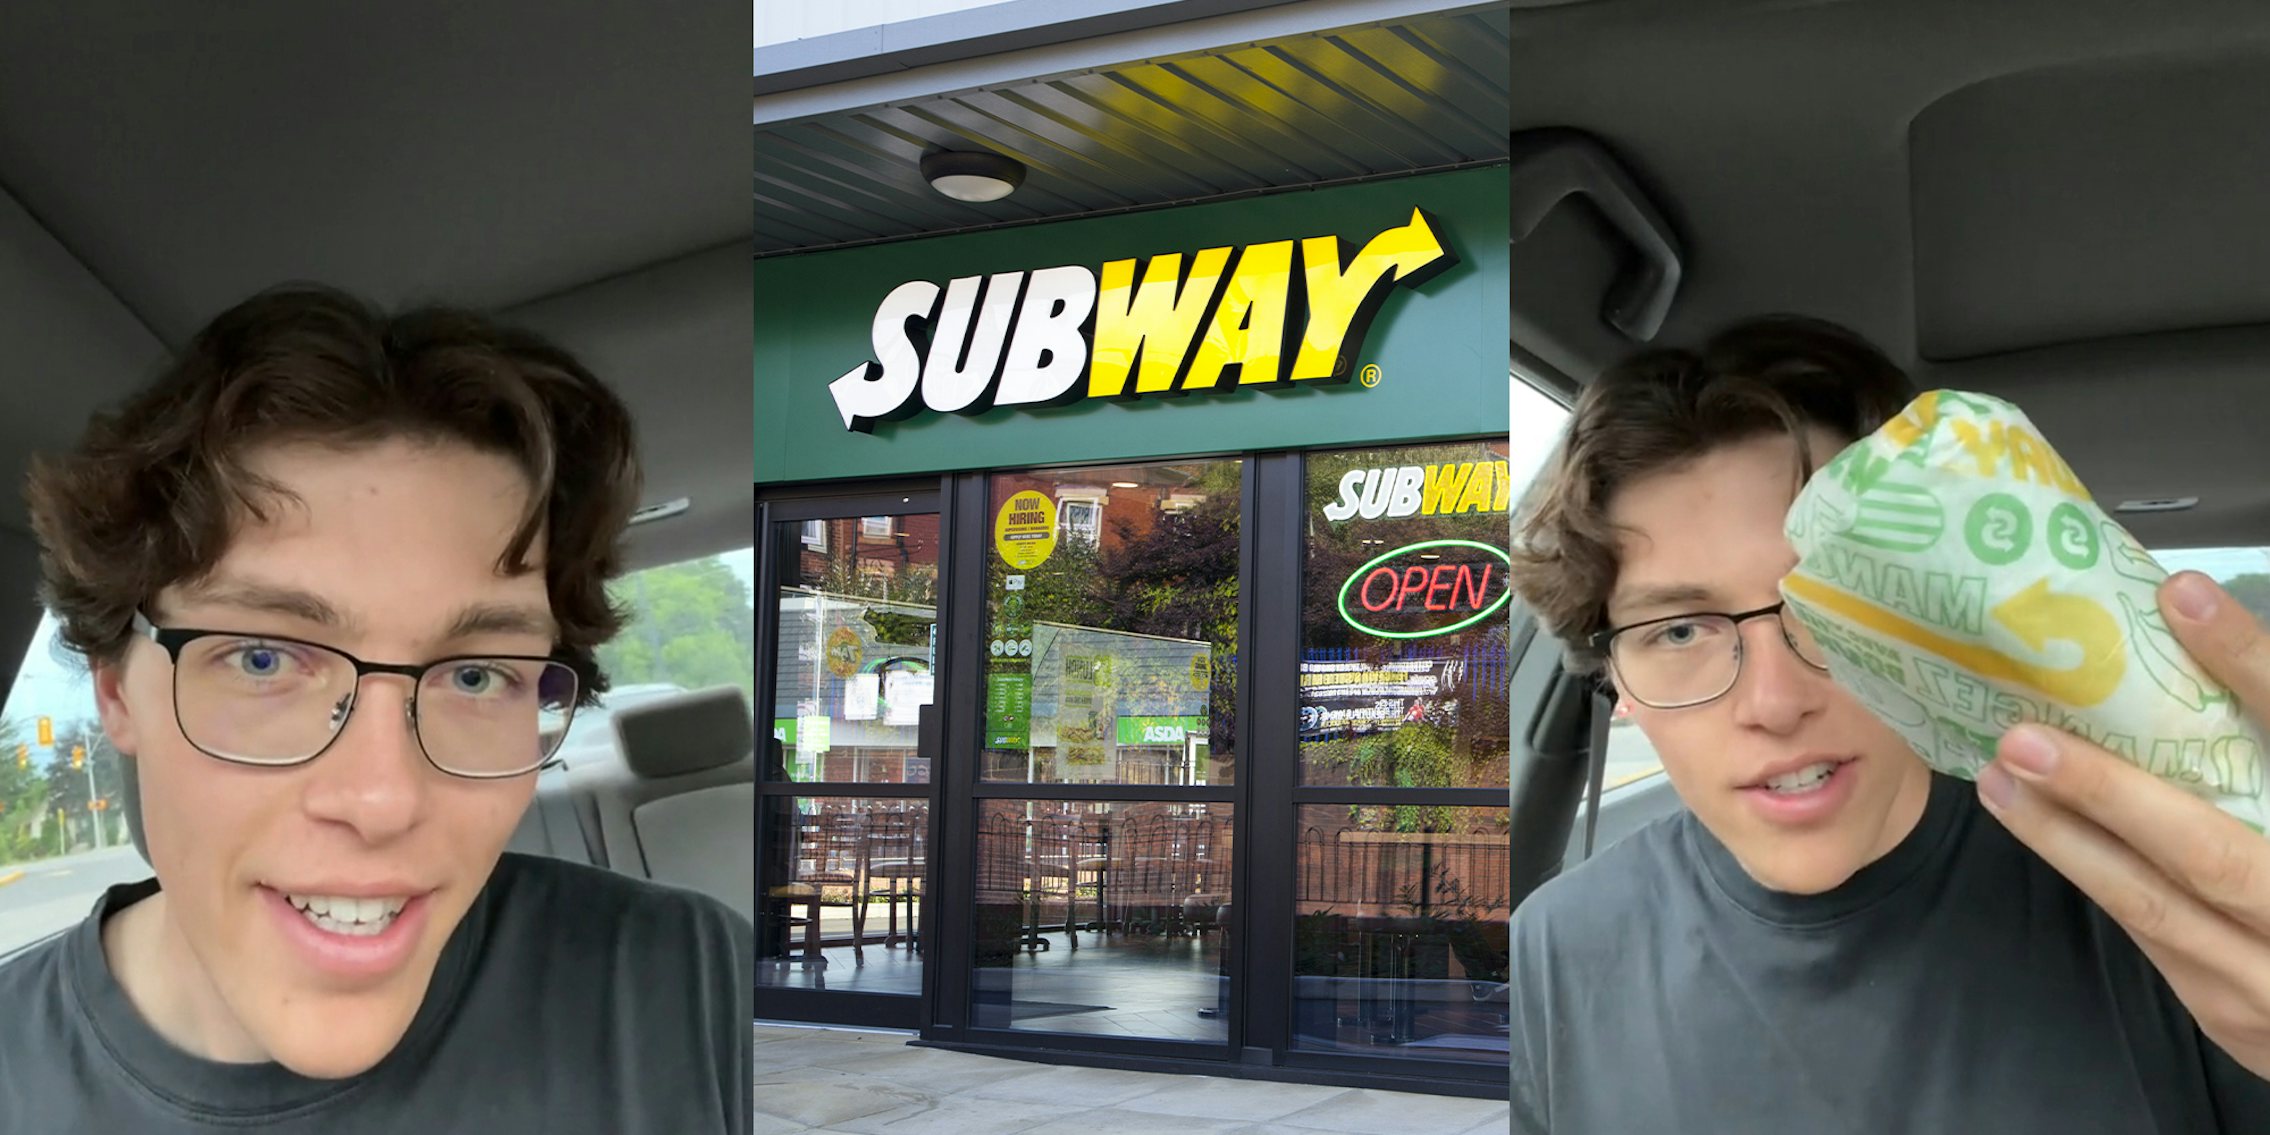 Customer slams Subway after paying $15 for 6-inch sub and 2 cookies